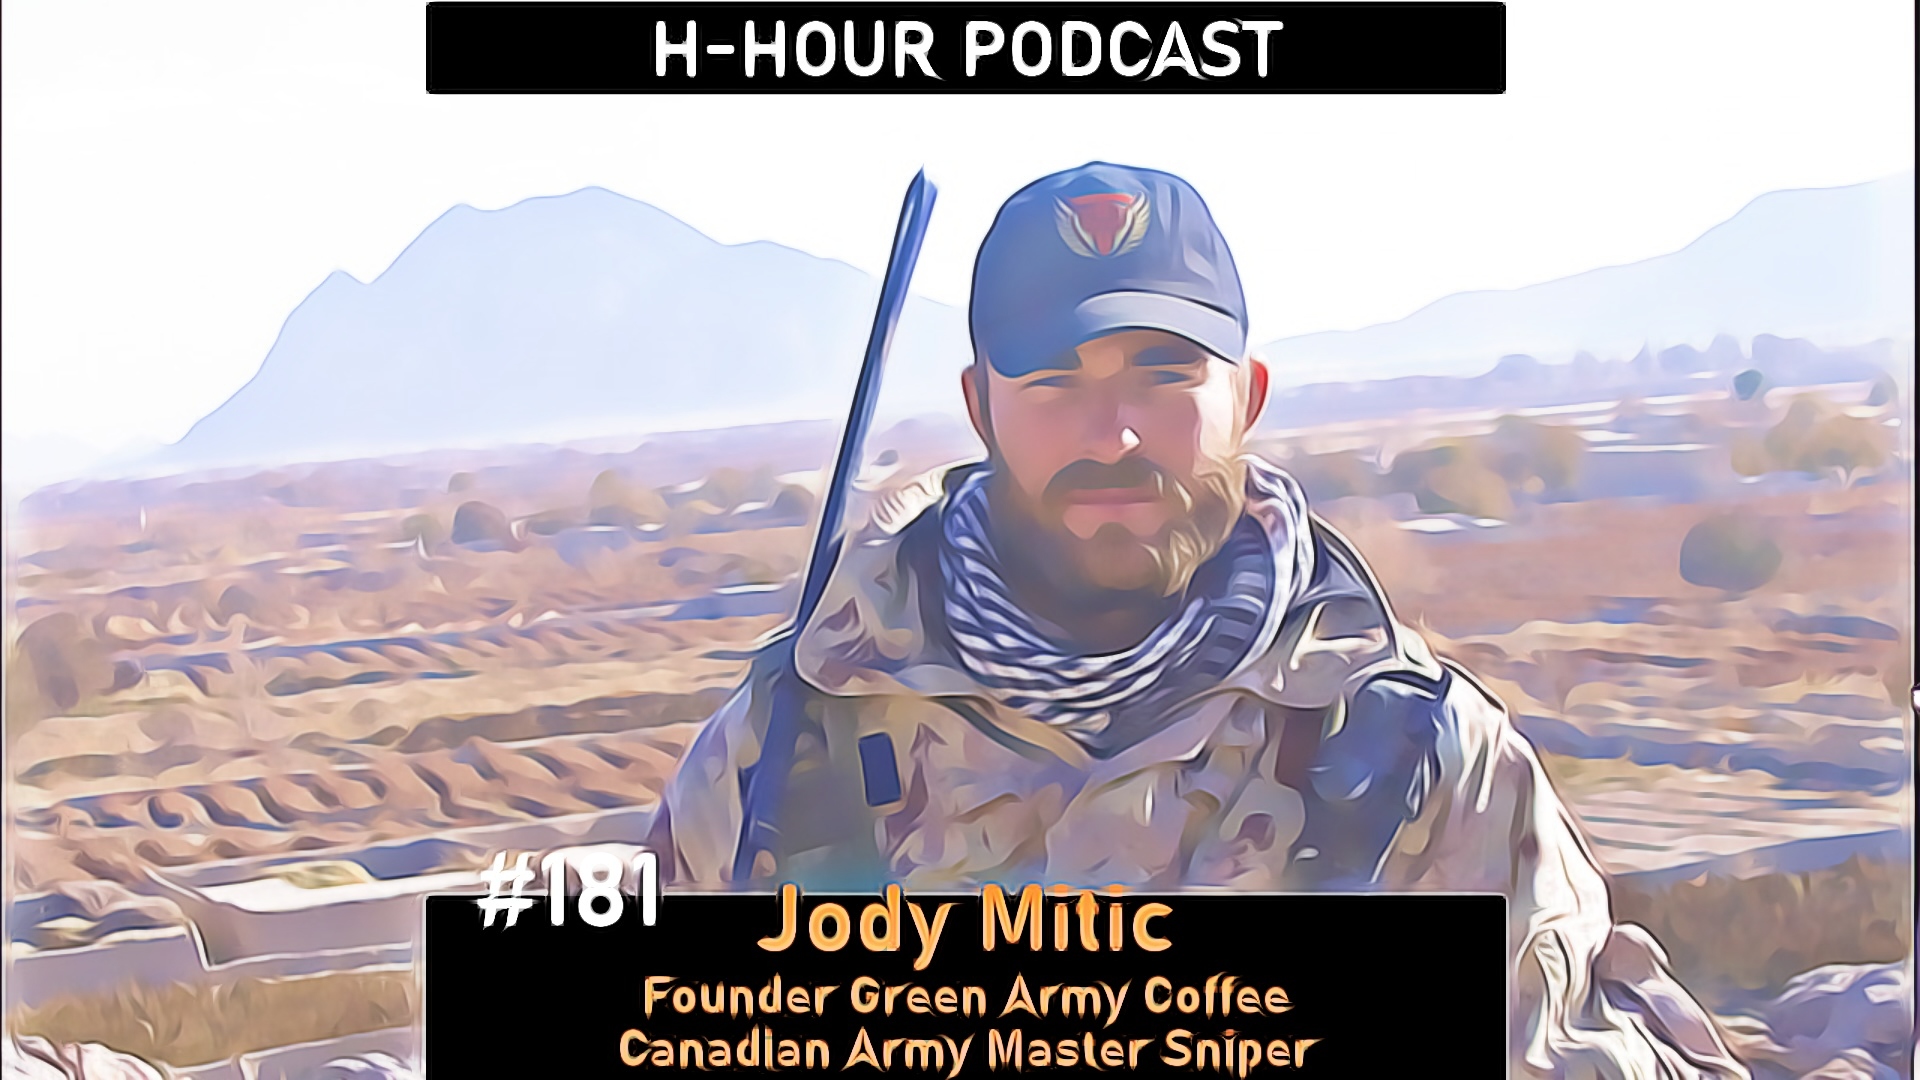 h-hour Podcast NFT #181 jody mitic cover image